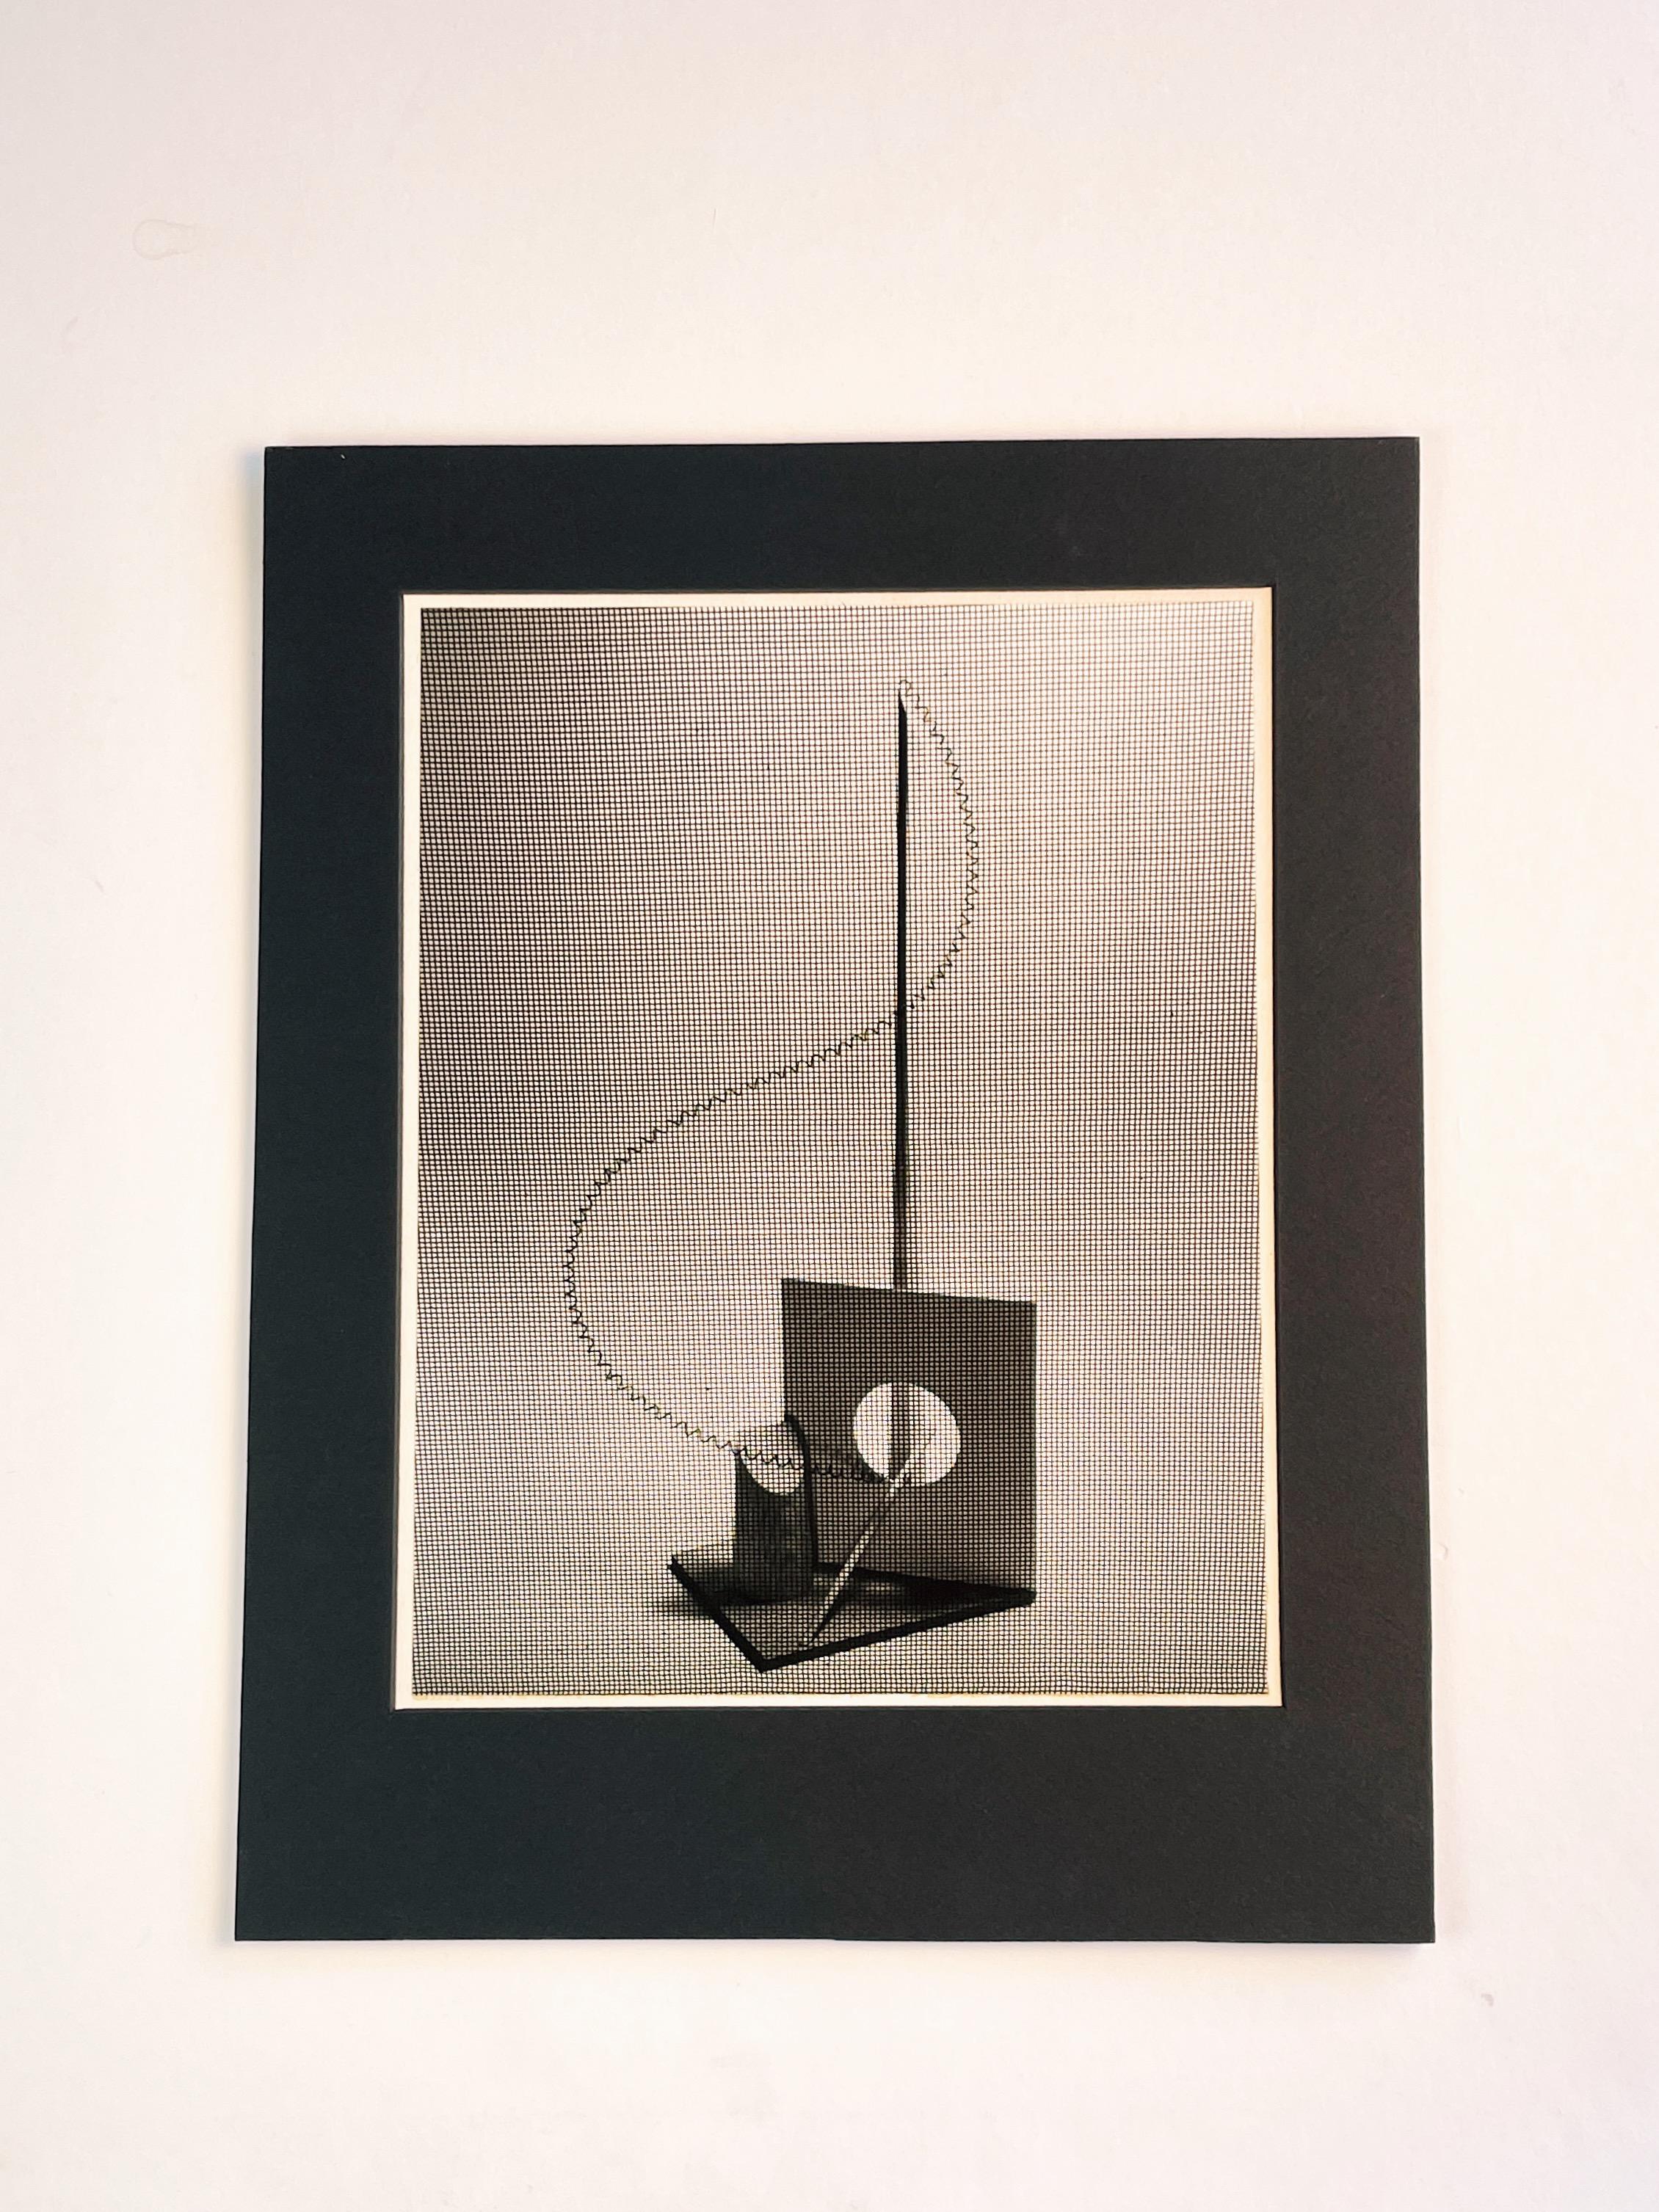 Experimental still life by Surrealist photographer, Paul Heismann, c. 1930s. Gelatin silver print, photographer credit stamped on mount verso. Unframed

dimensions:
image 13.2 x 10.2inches
matting 18 x 14 inches (window opening 13.5 x 10.5